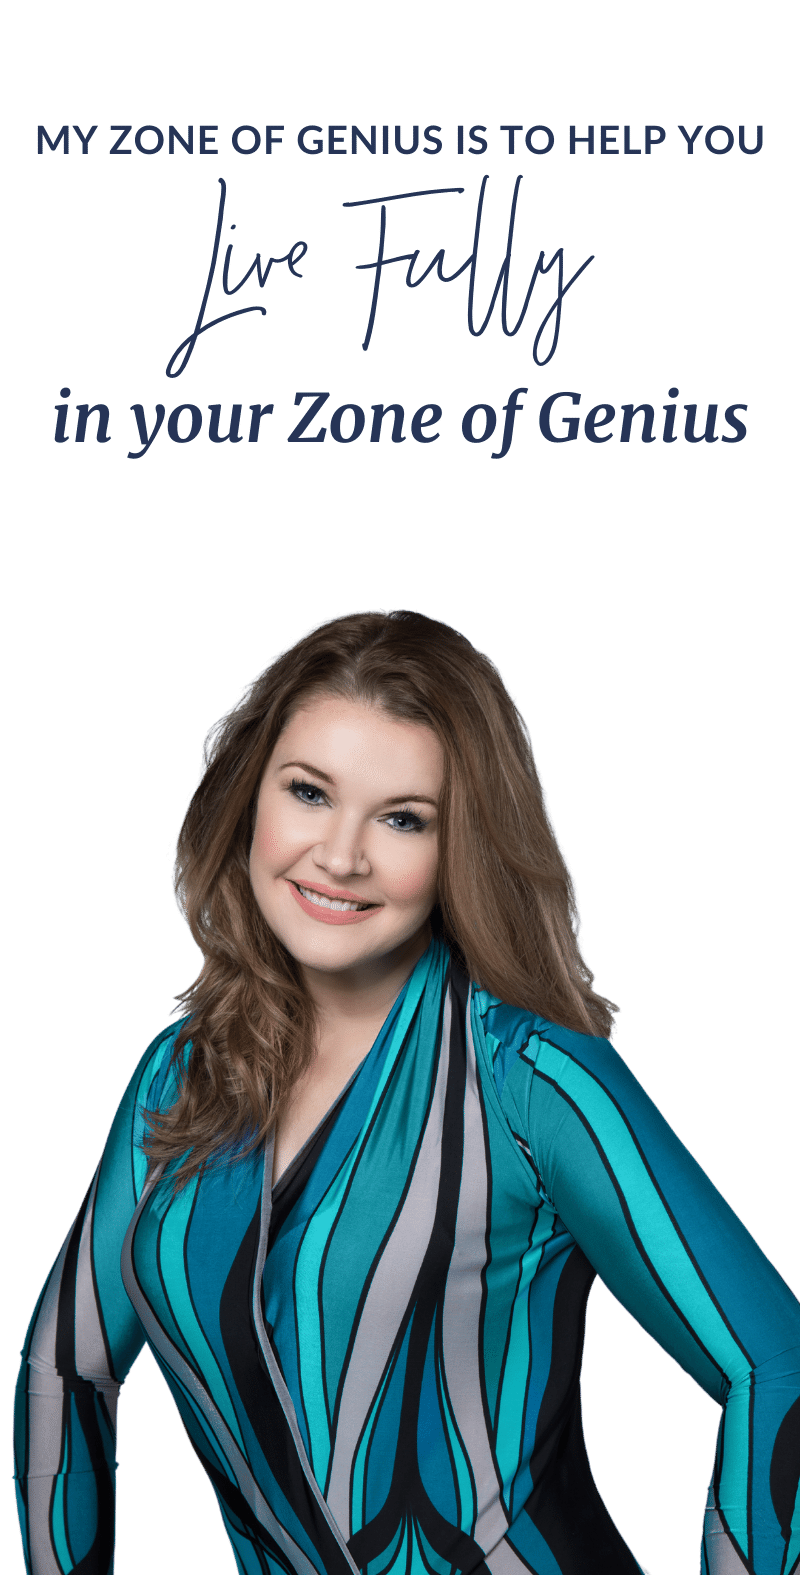 My Zone of Genius is to help you live fully in your zone of genius